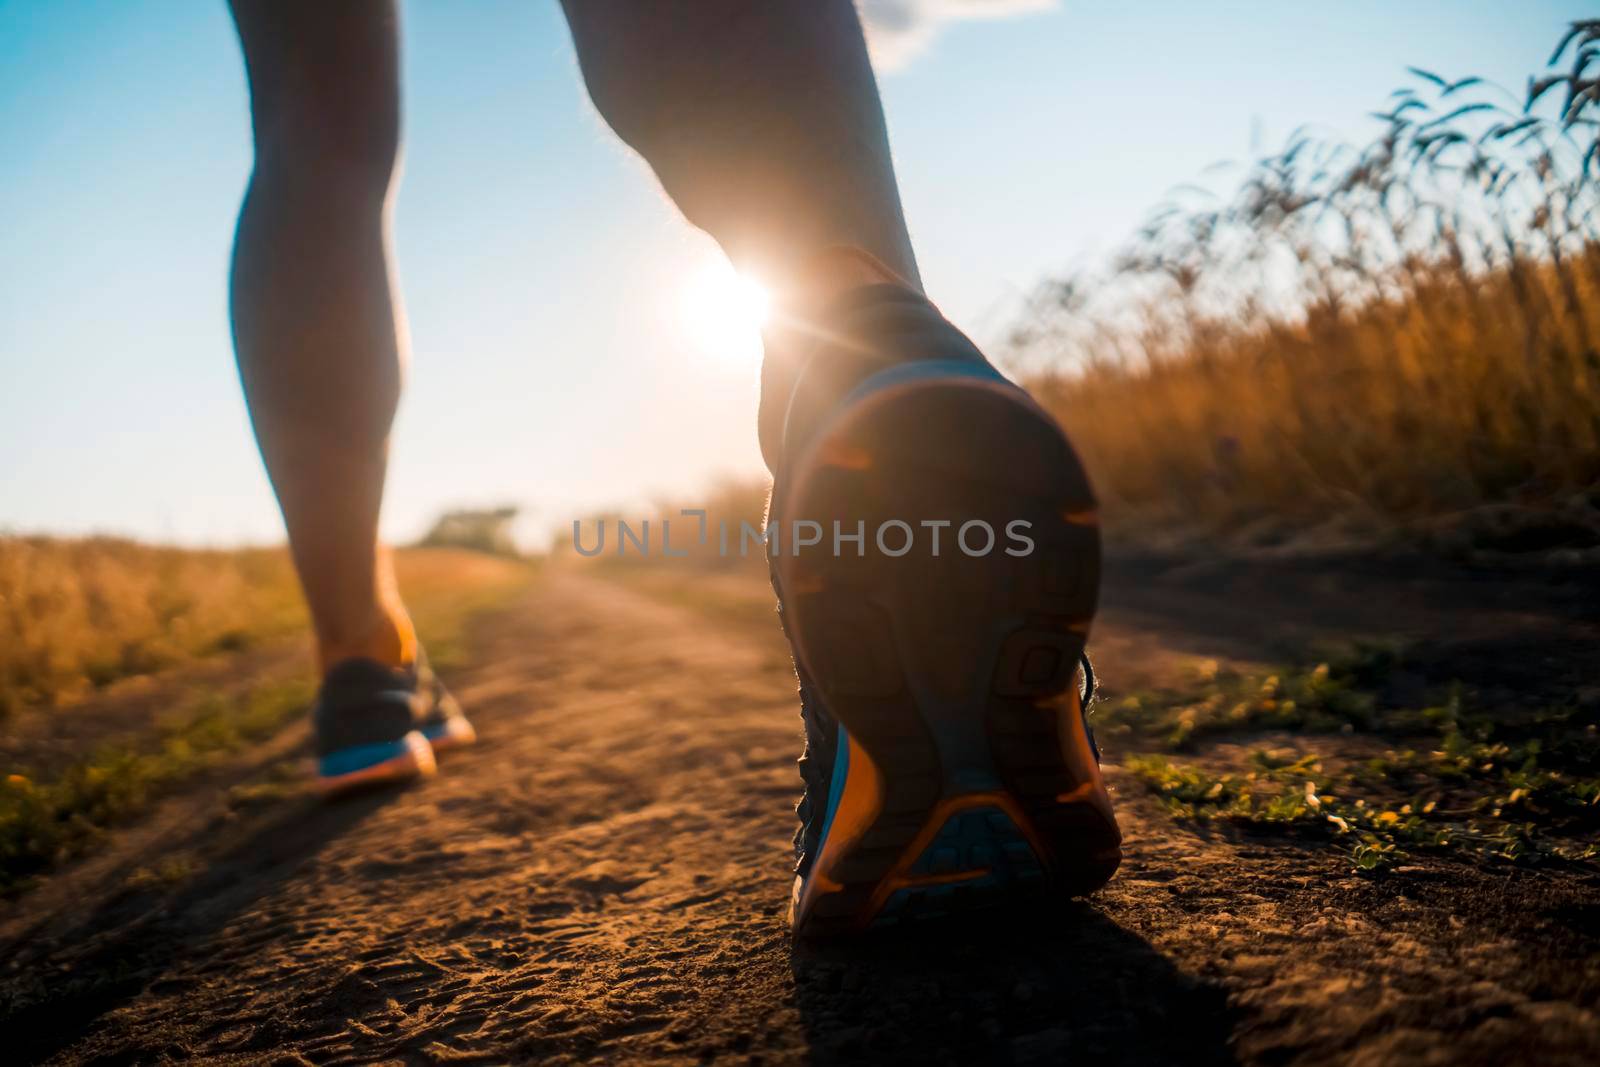 Athlete runner legs running on a close-up of a trail across a field on a shoe. Fitness and warm-up, young man with sun effect in the background and open space around him.